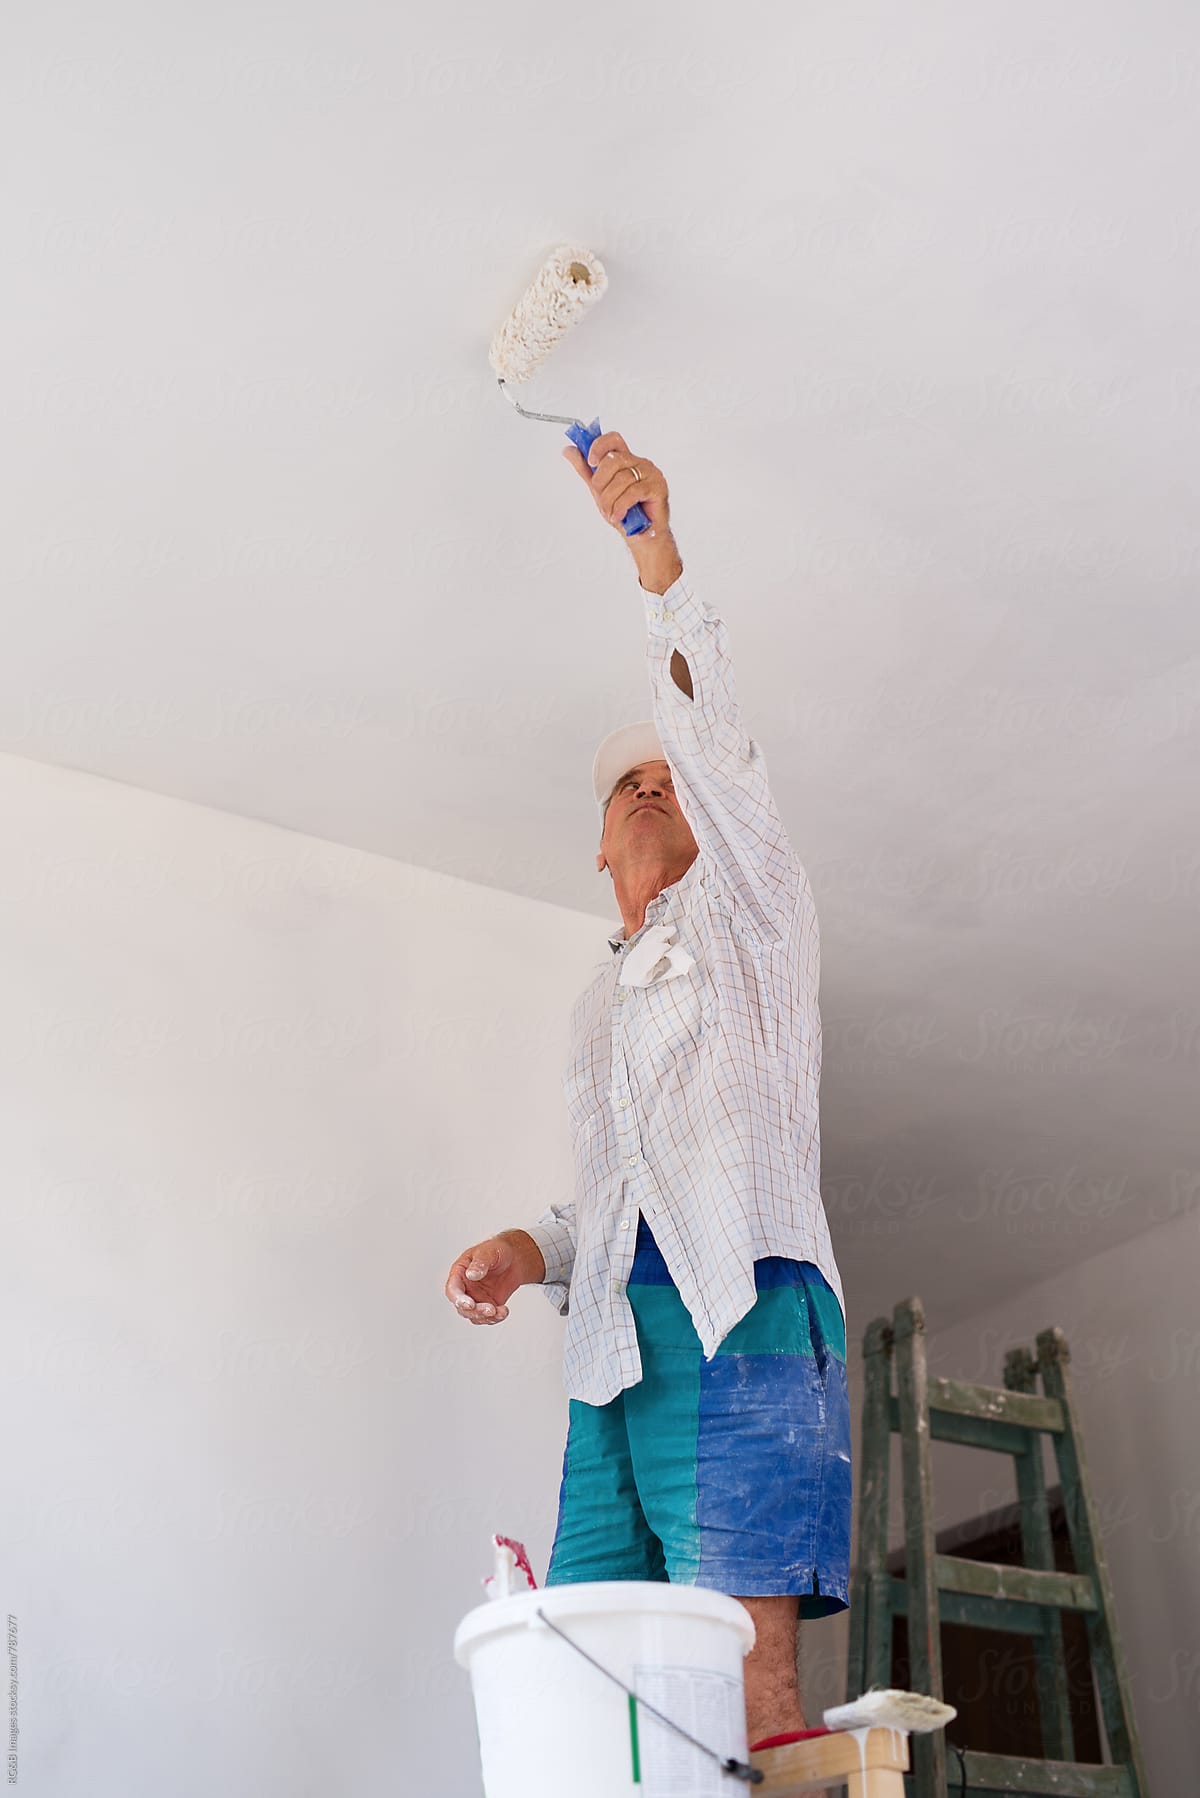 Craftsman painting the indoor walls white